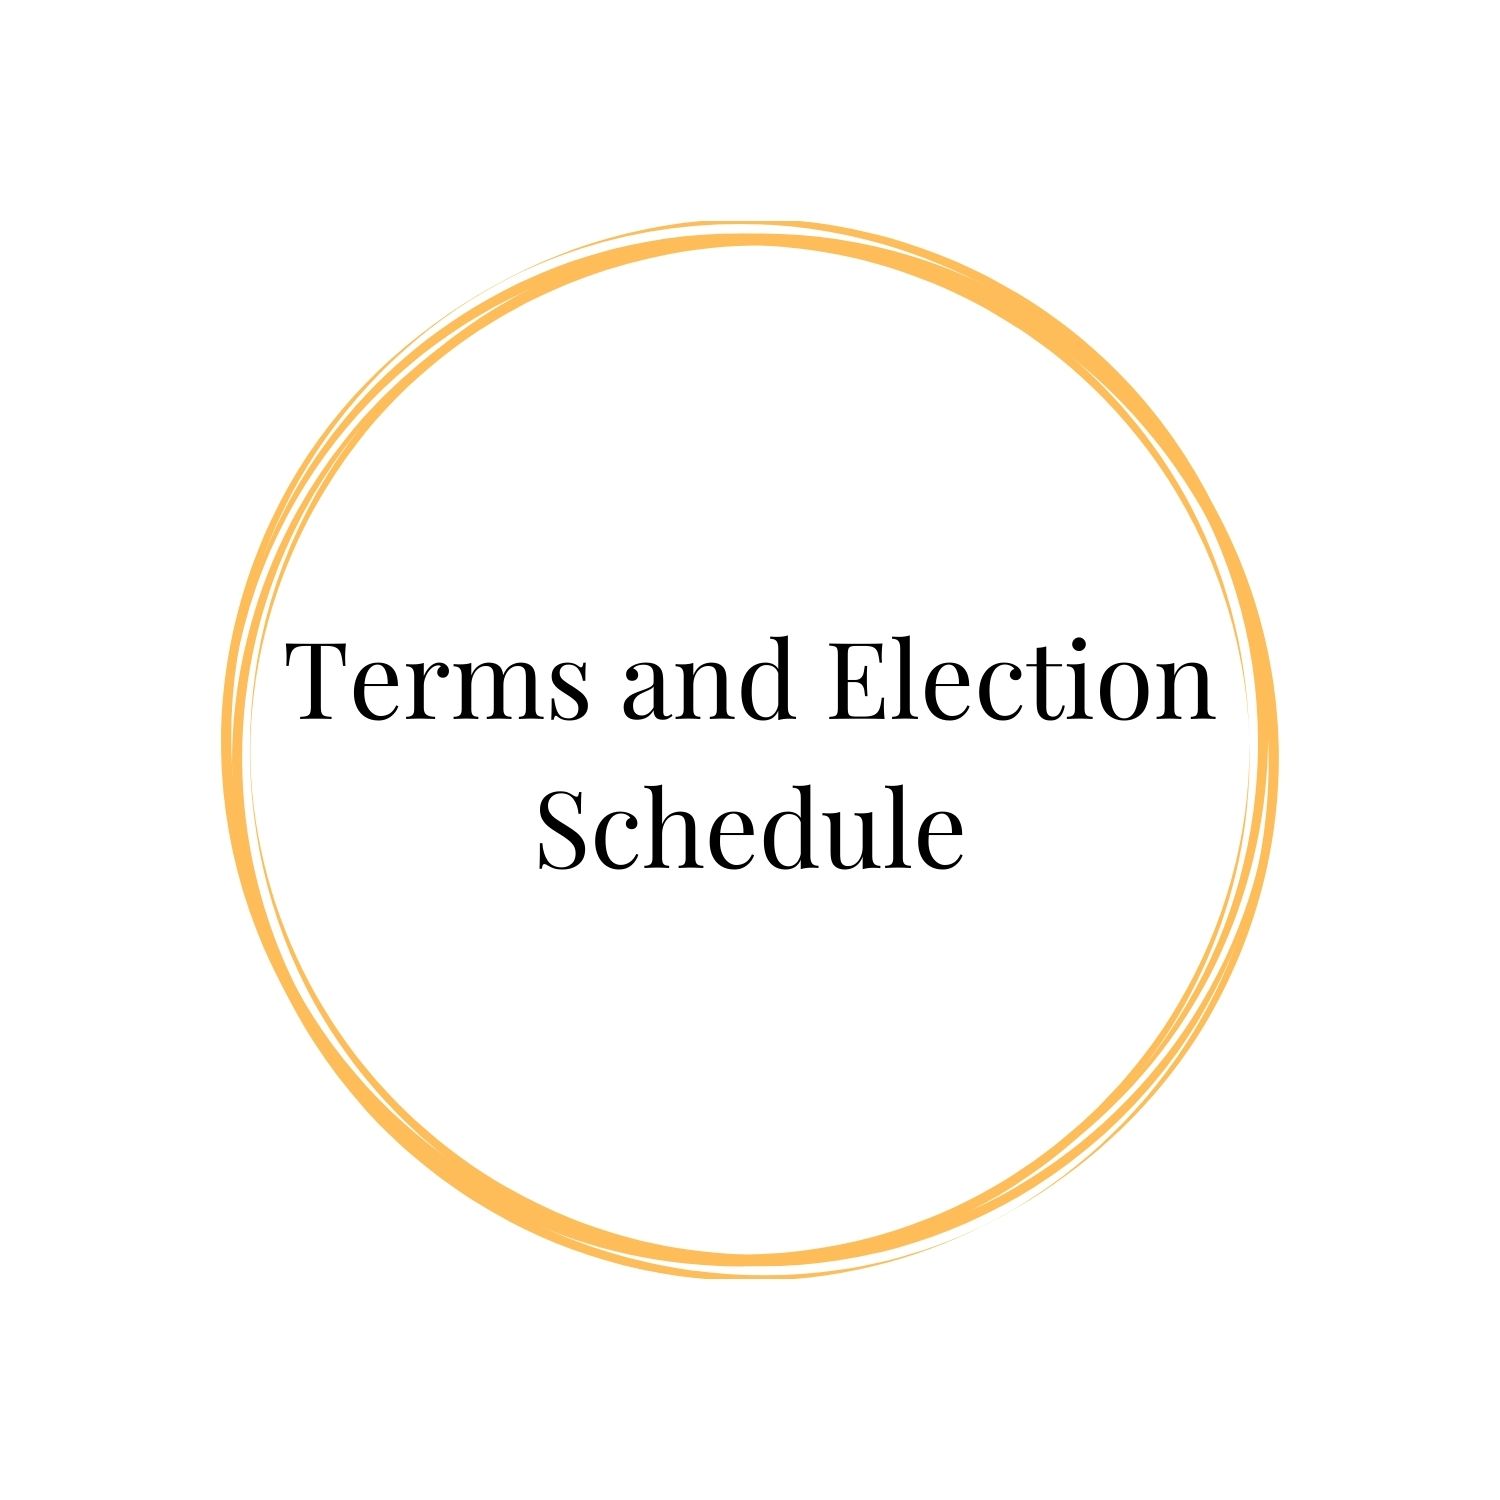 Terms and Election Schedule Photo